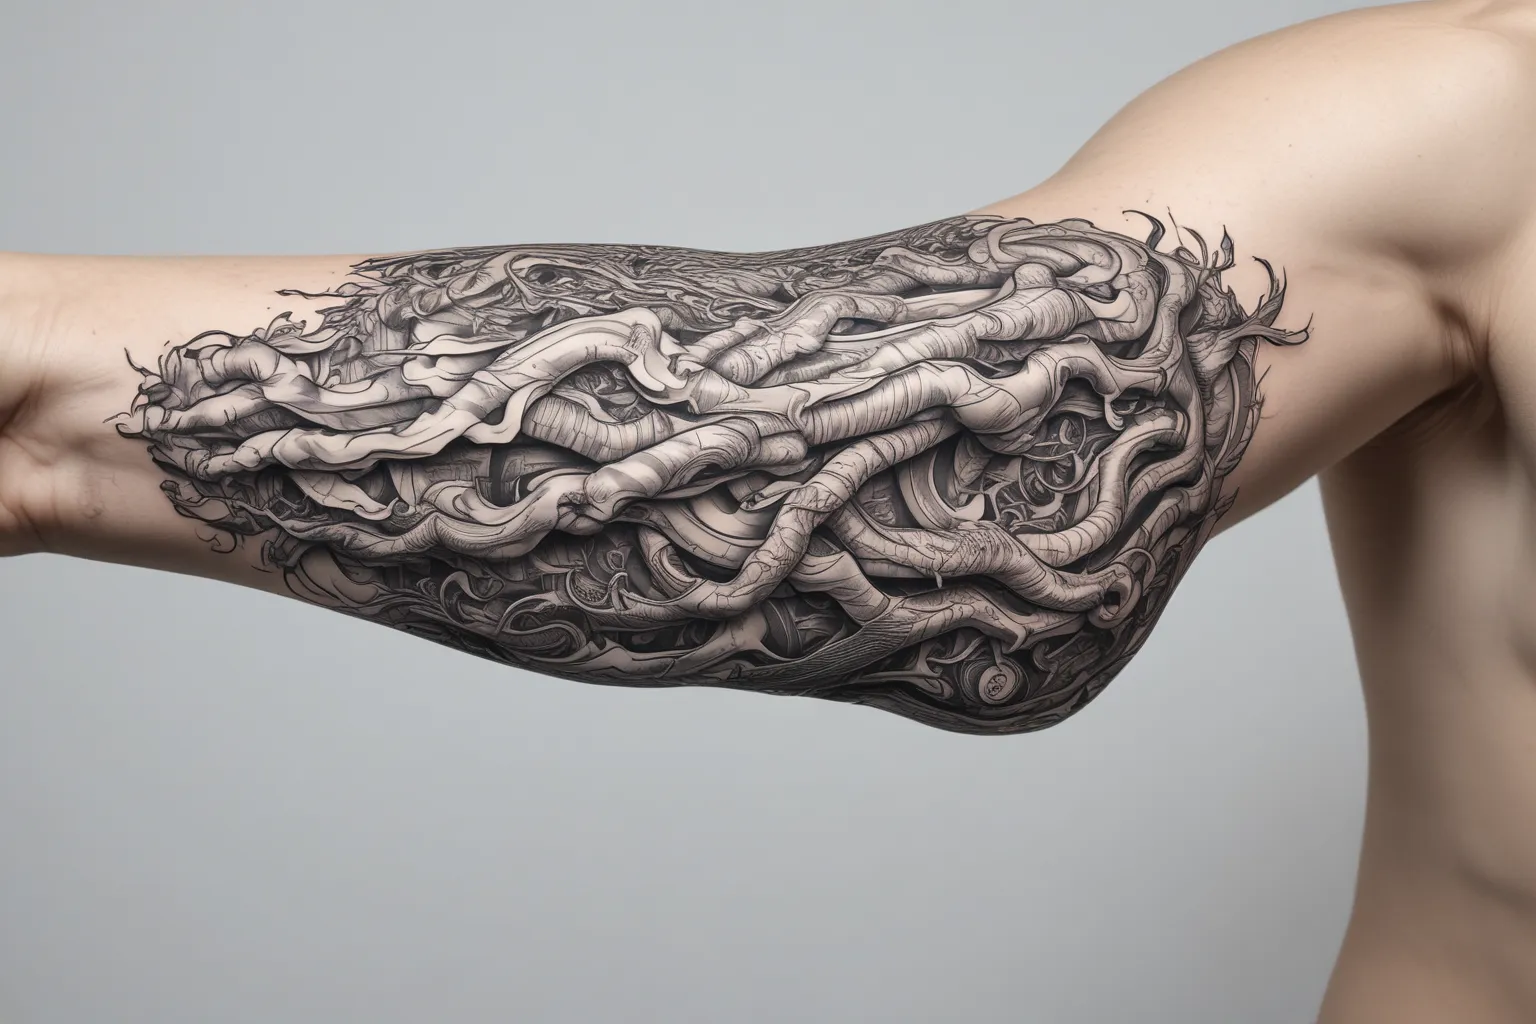 inner elbow crook of the arm ,a vein tattoo of the basilic mcephalic and median cubicle veins in 3d effect tetování